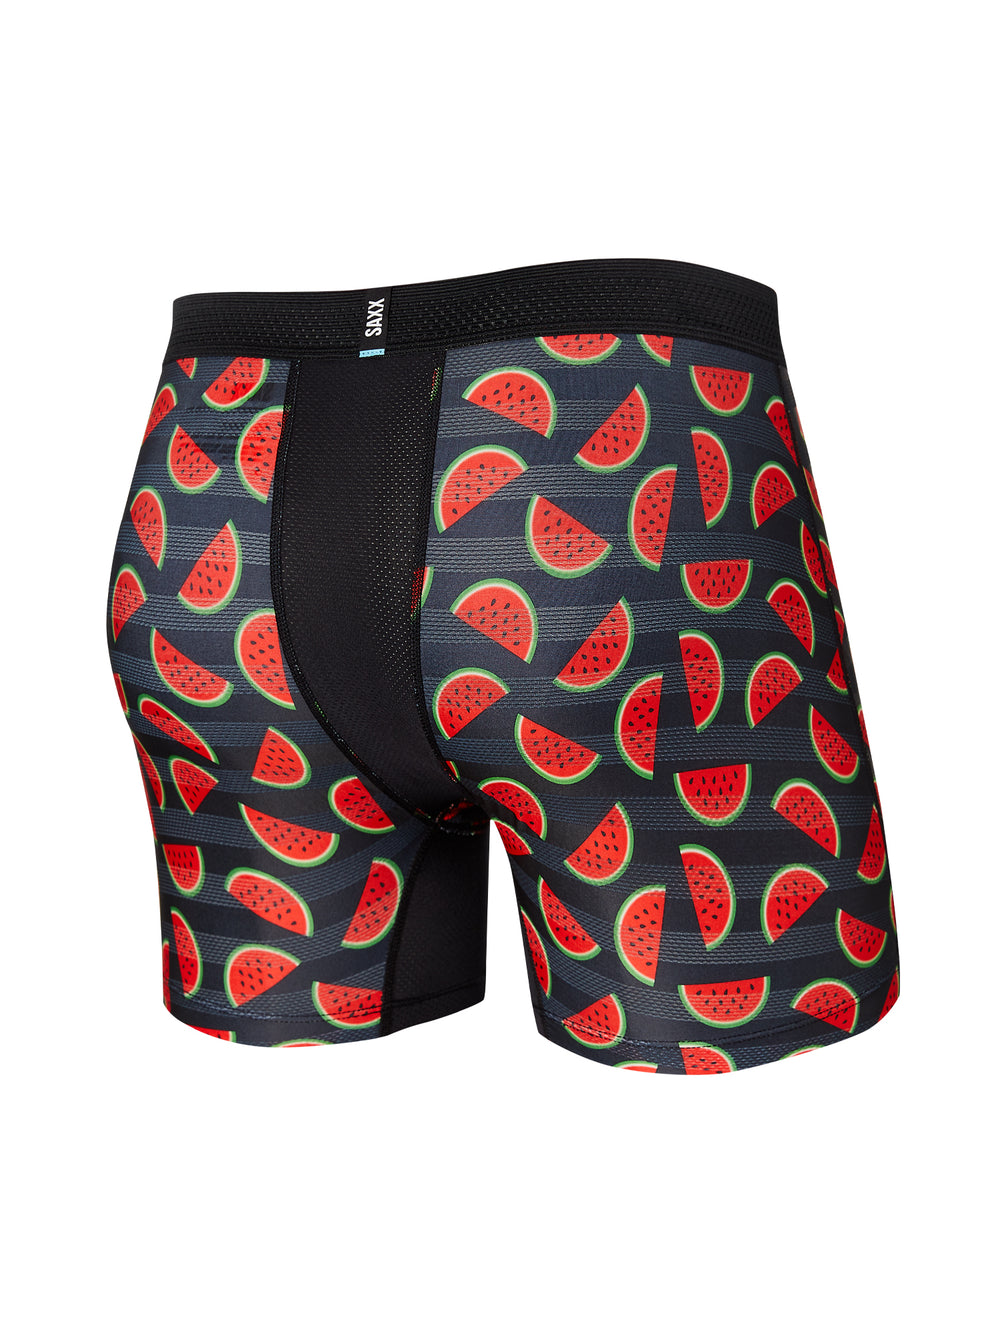 SAXX HOT SHOT BOXER BRIEF - SUMMER FAVE WATERMELONS - CLEARANCE